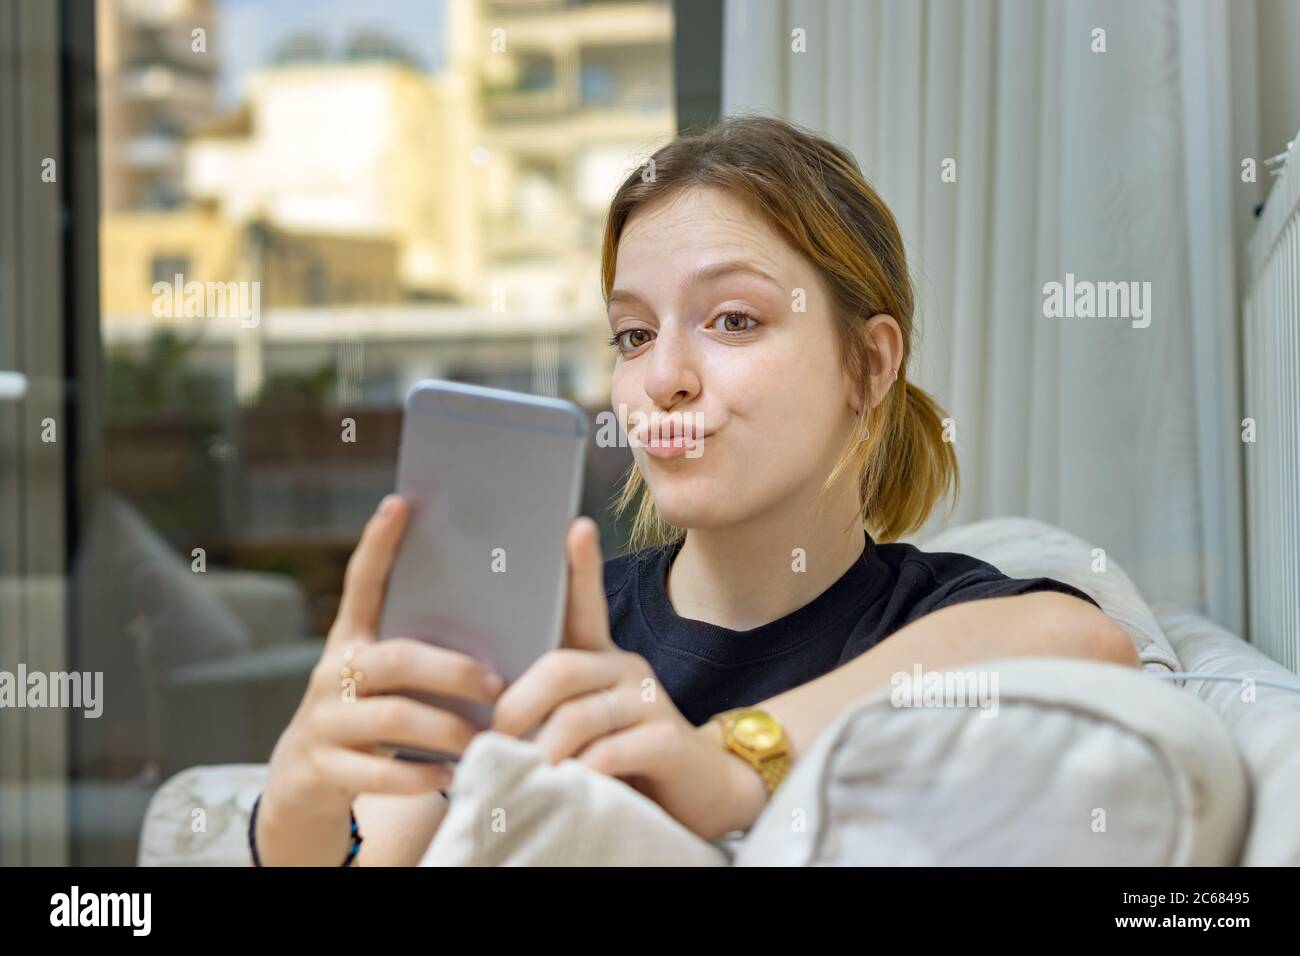 Teenage girl taking a selfie with duck face at home Stock Photo